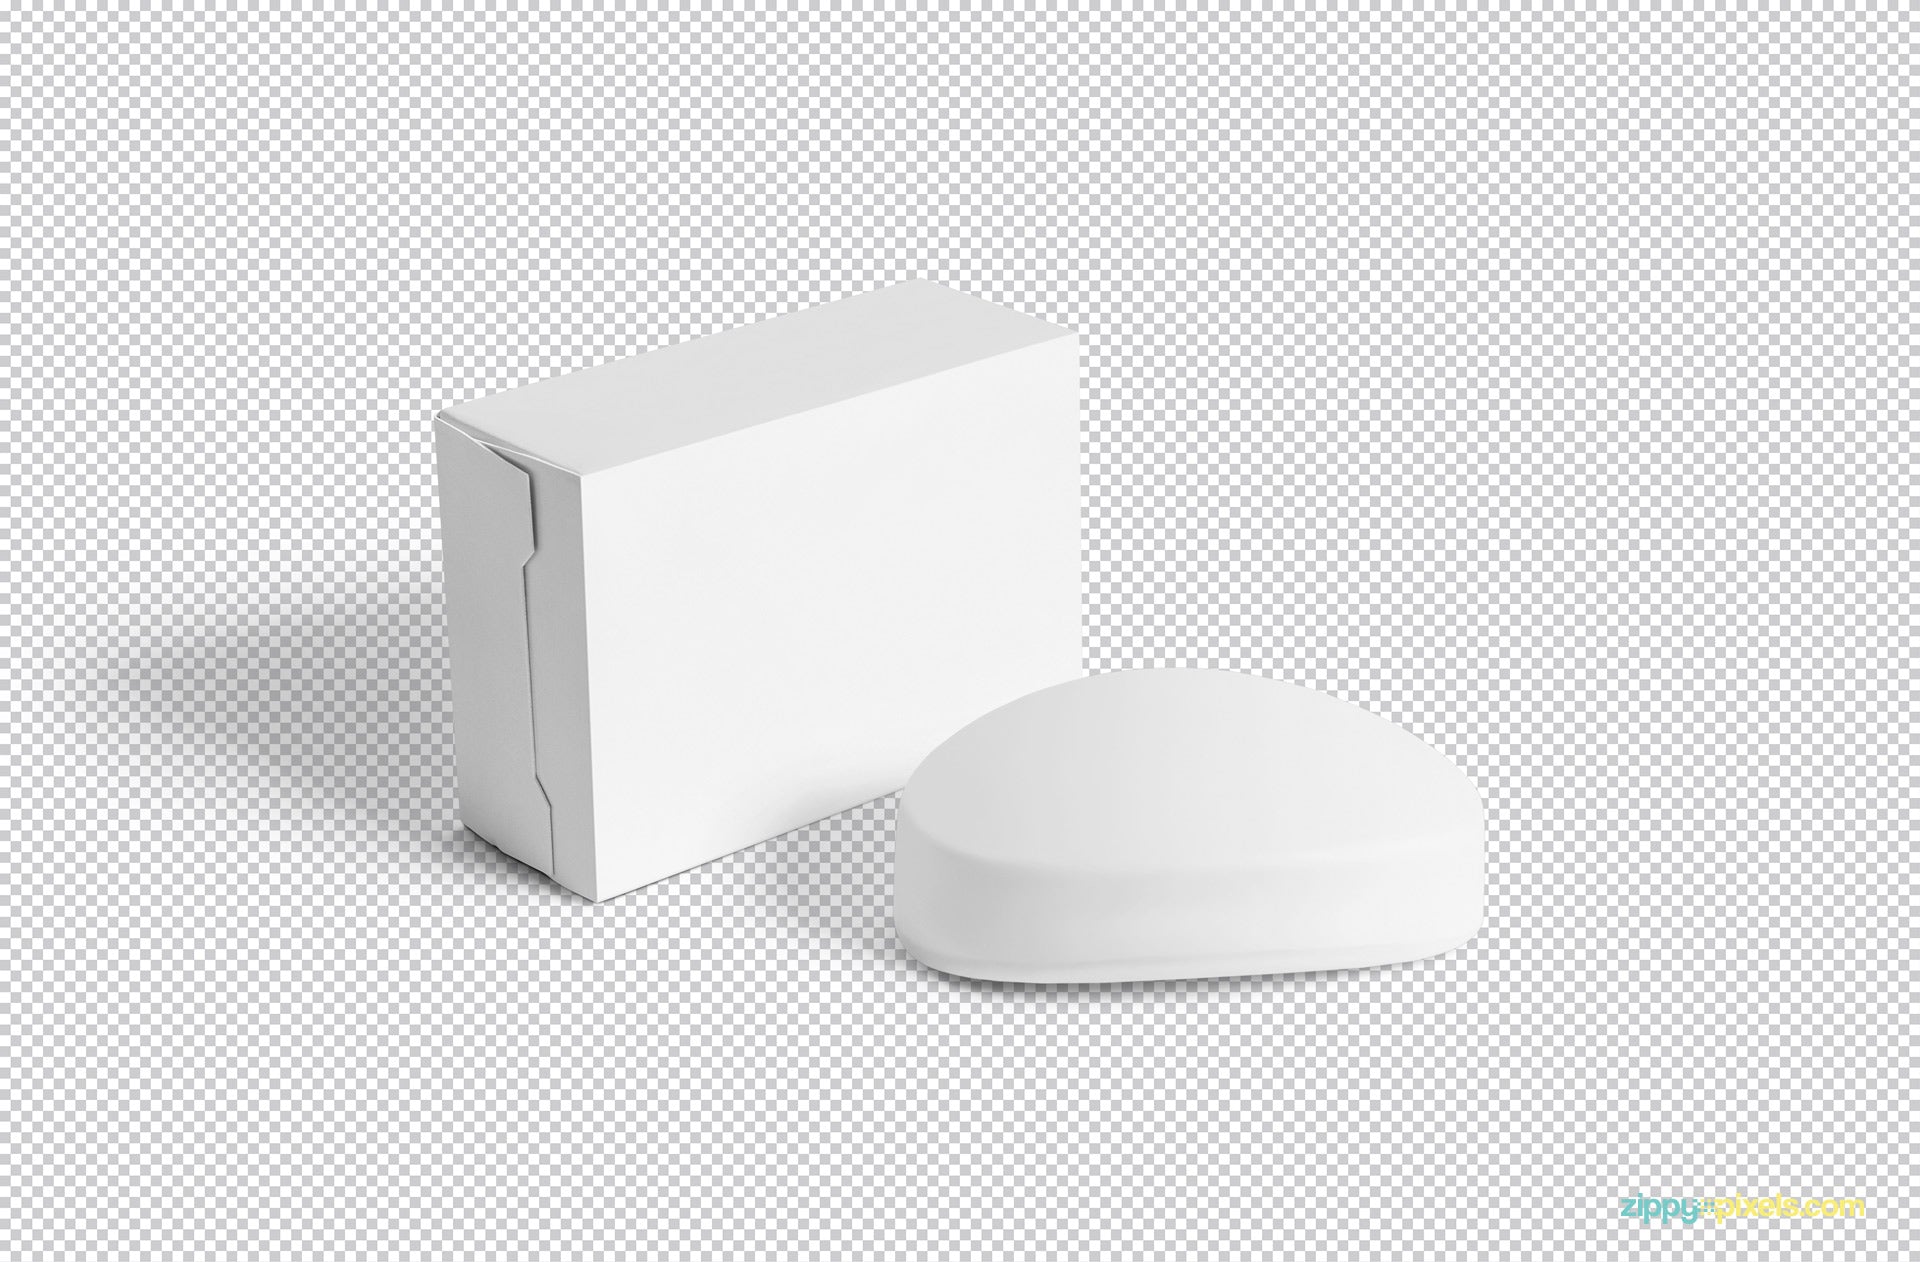 Download Free Packaging Box and Soap Mockup - CreativeBooster